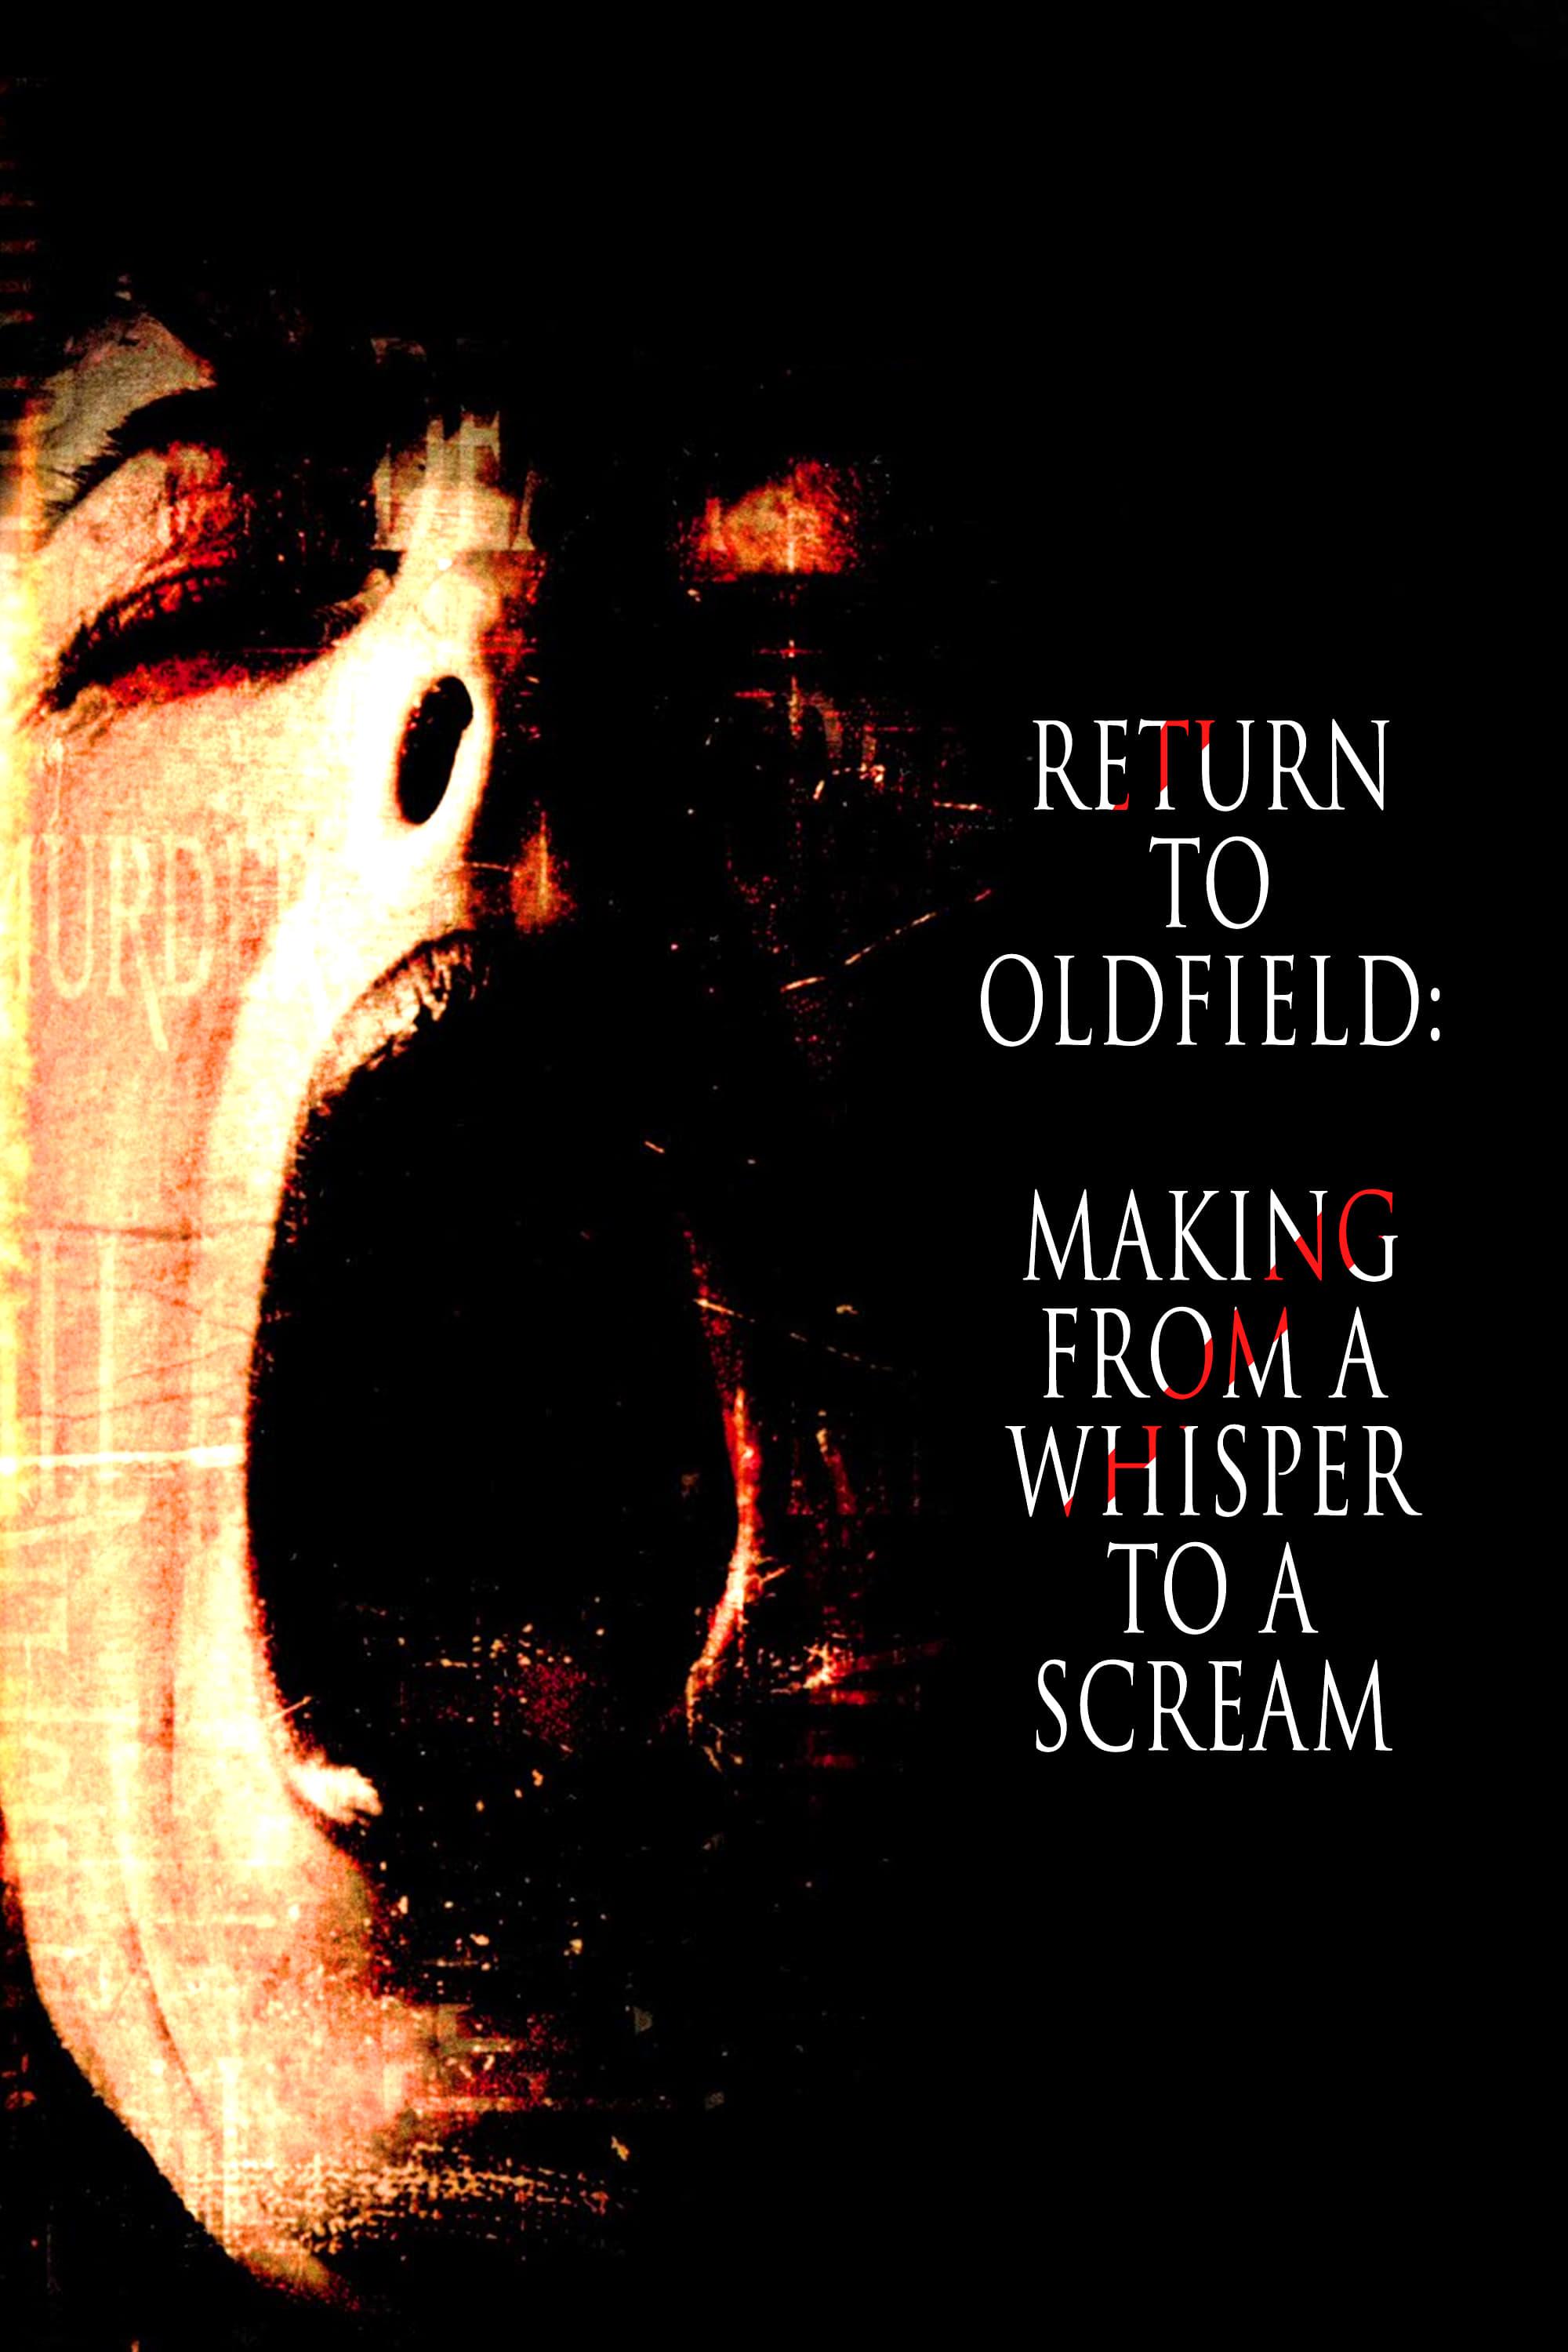 Return to Oldfield: Making from a Whisper to a Scream poster